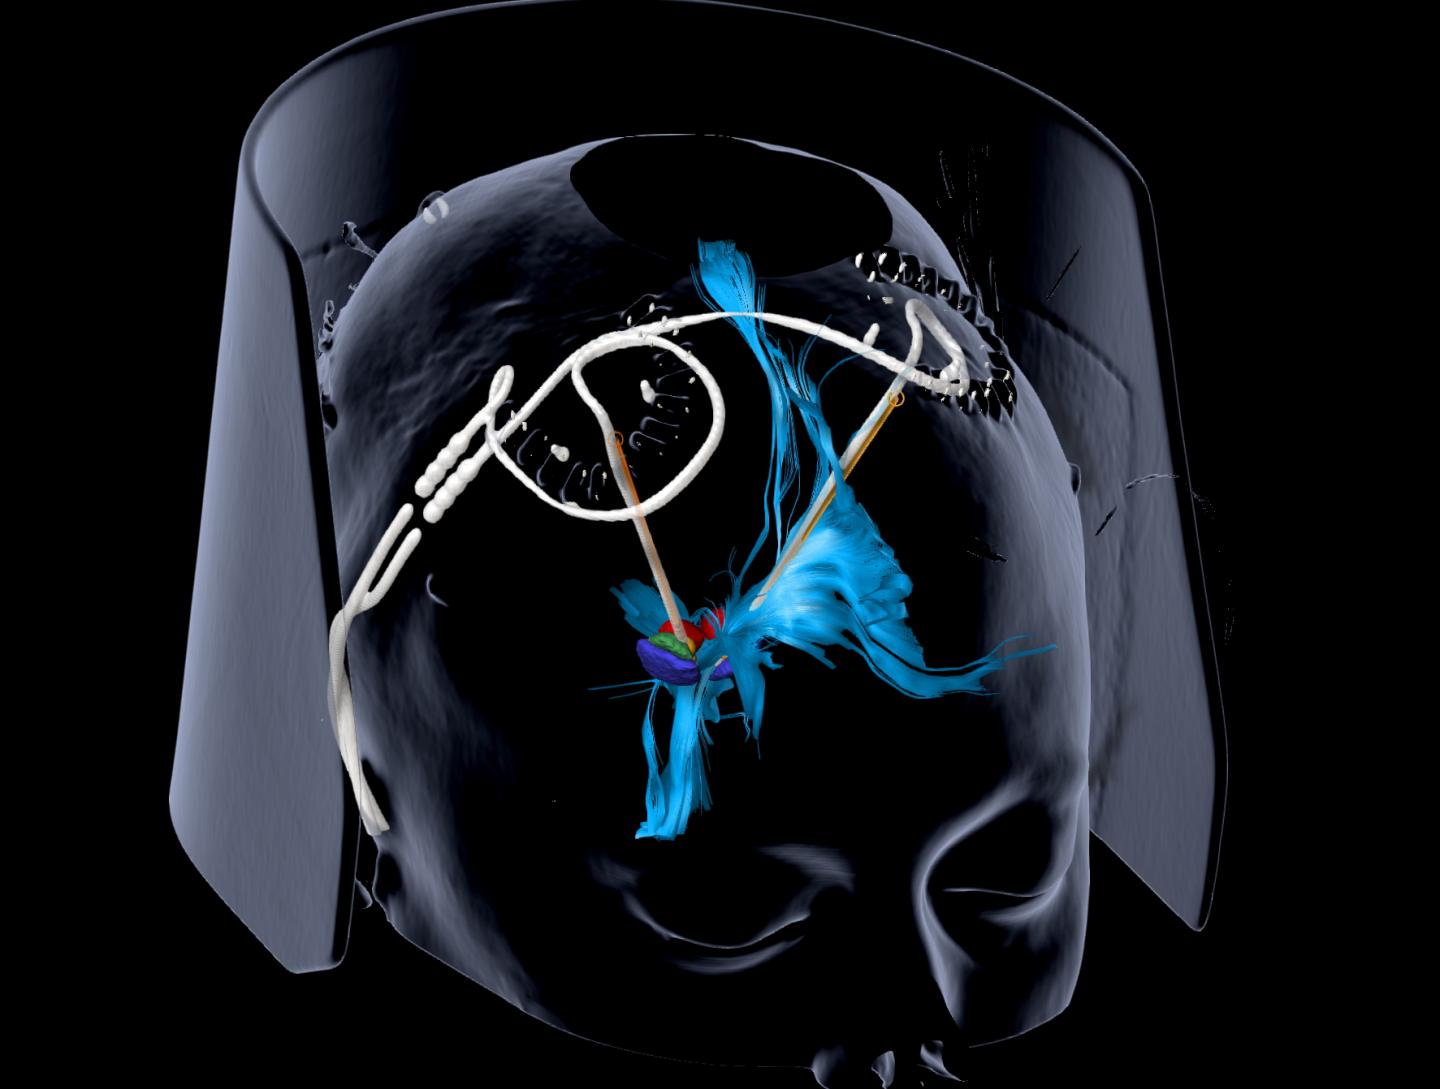 Deep Brain Stimulation Provides Sustained Relief for Severe Depression (IMAGE)